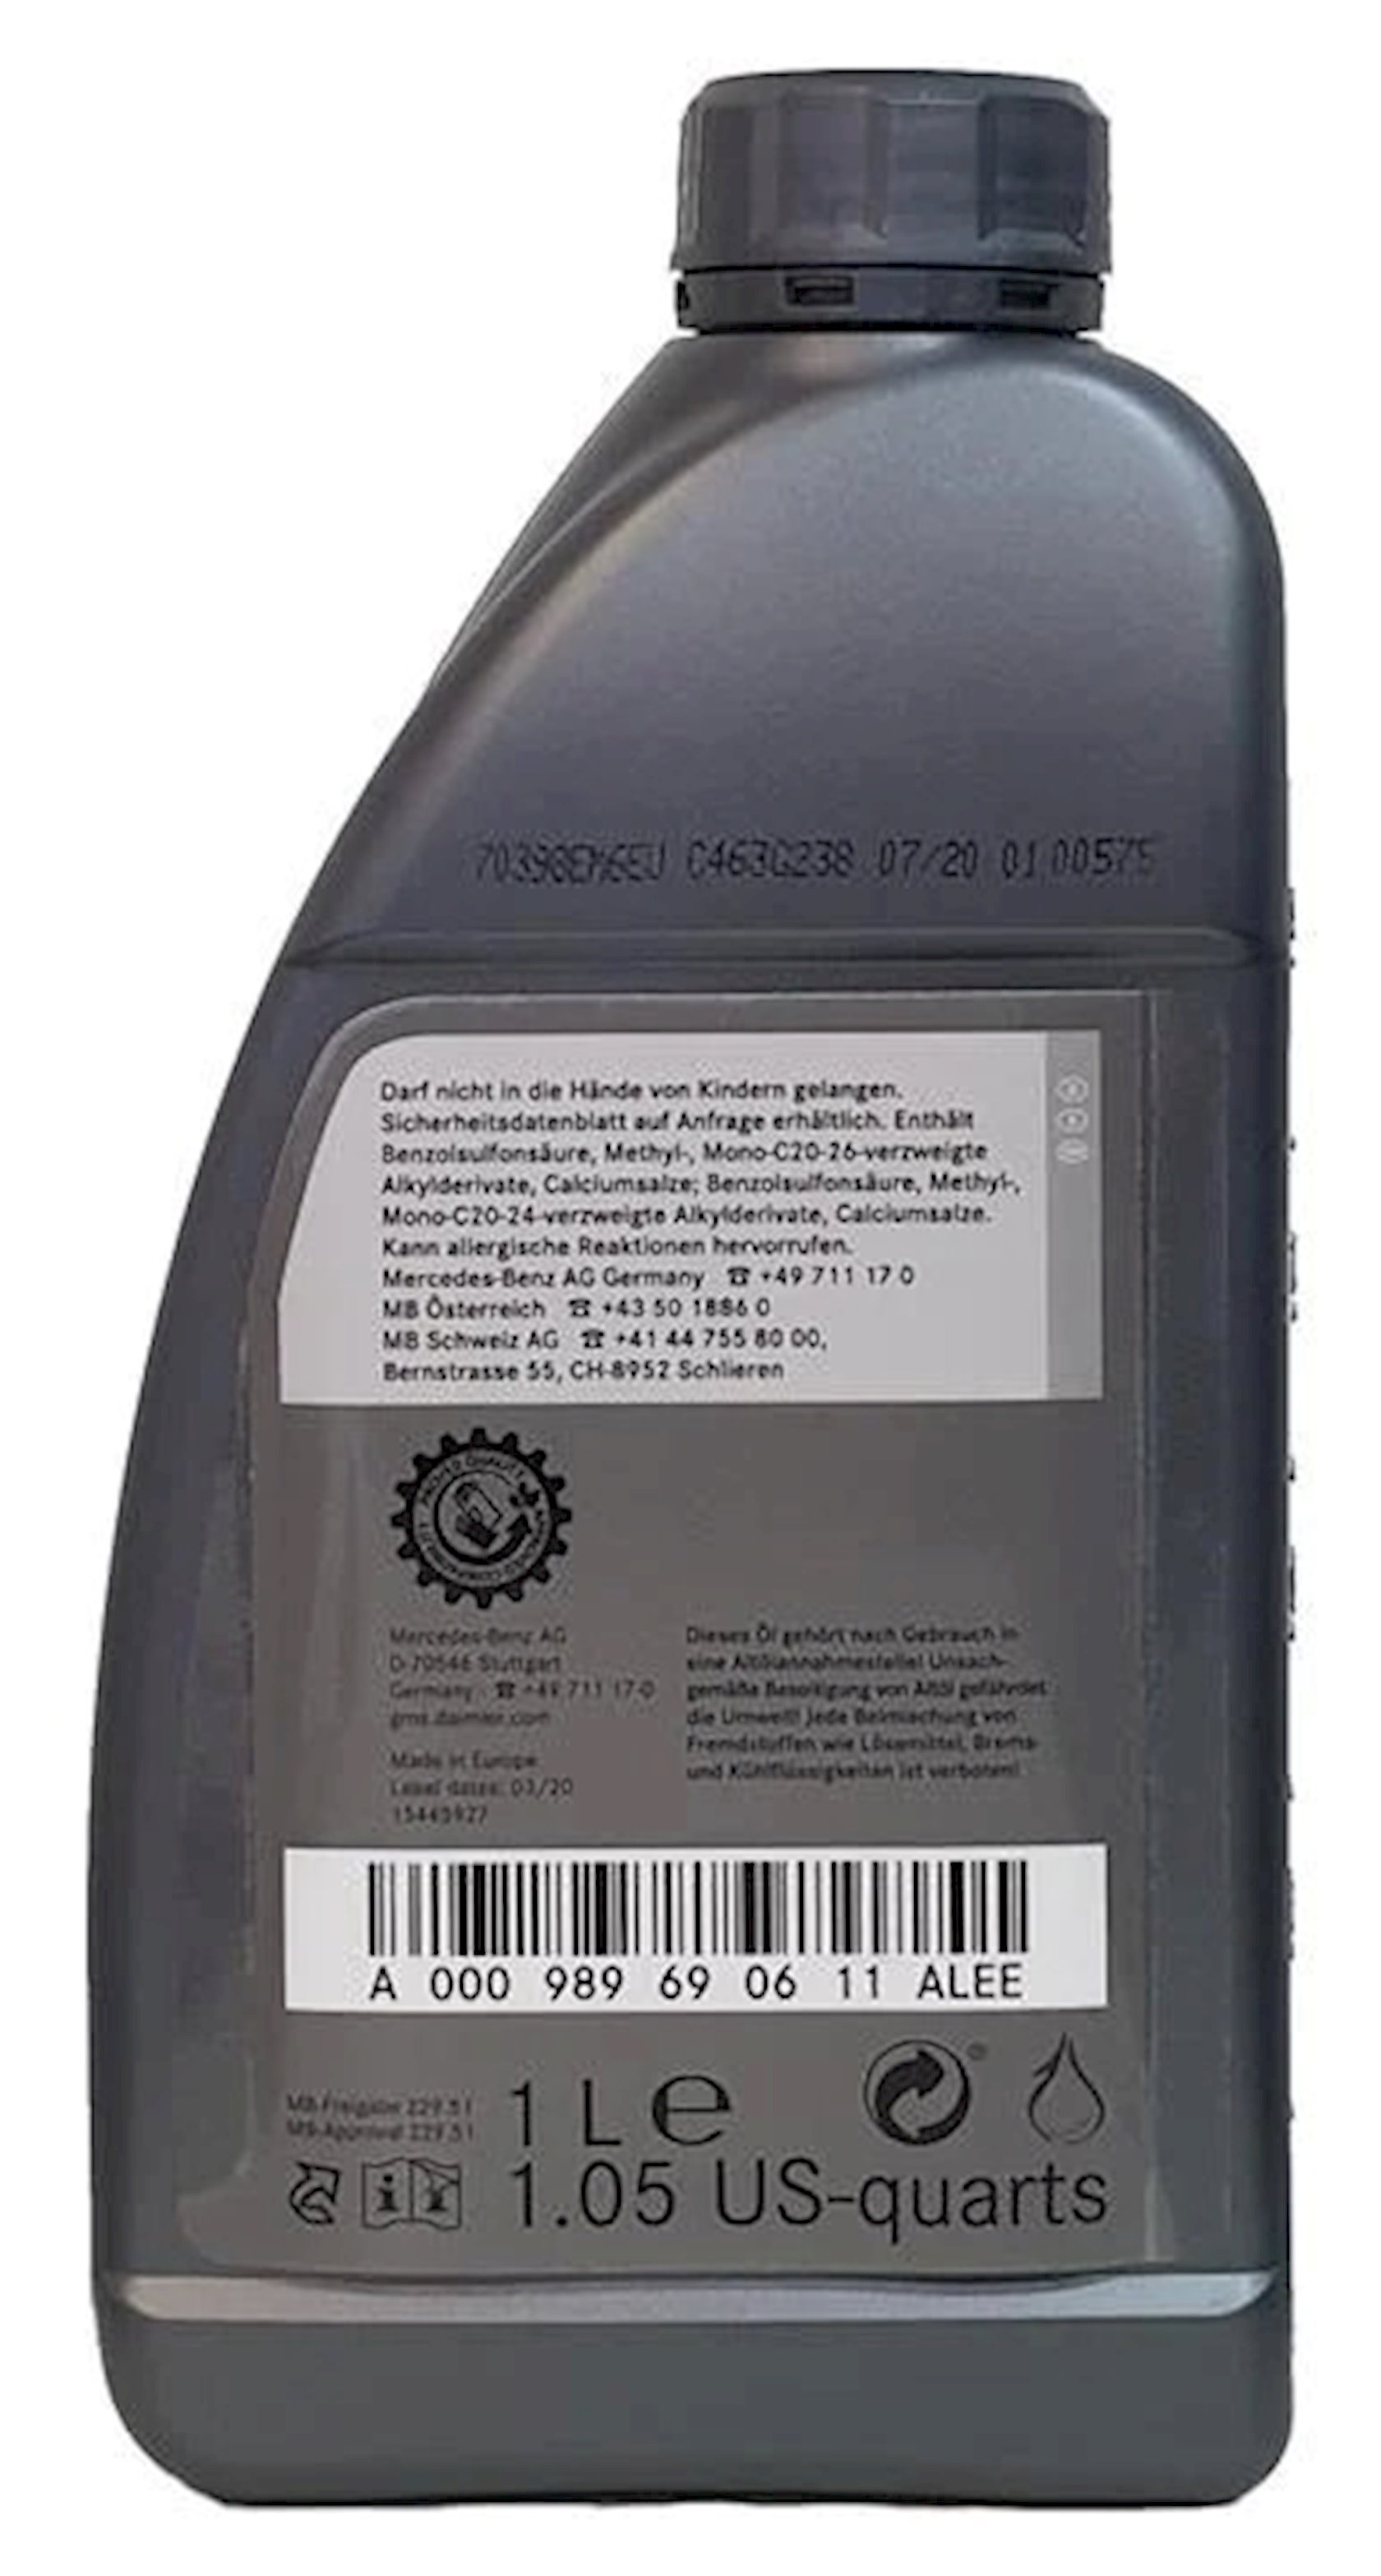 Моторное масло Mercedes МB Synthetic Engine Oil 5W-30 MB 229.51, 1 л .